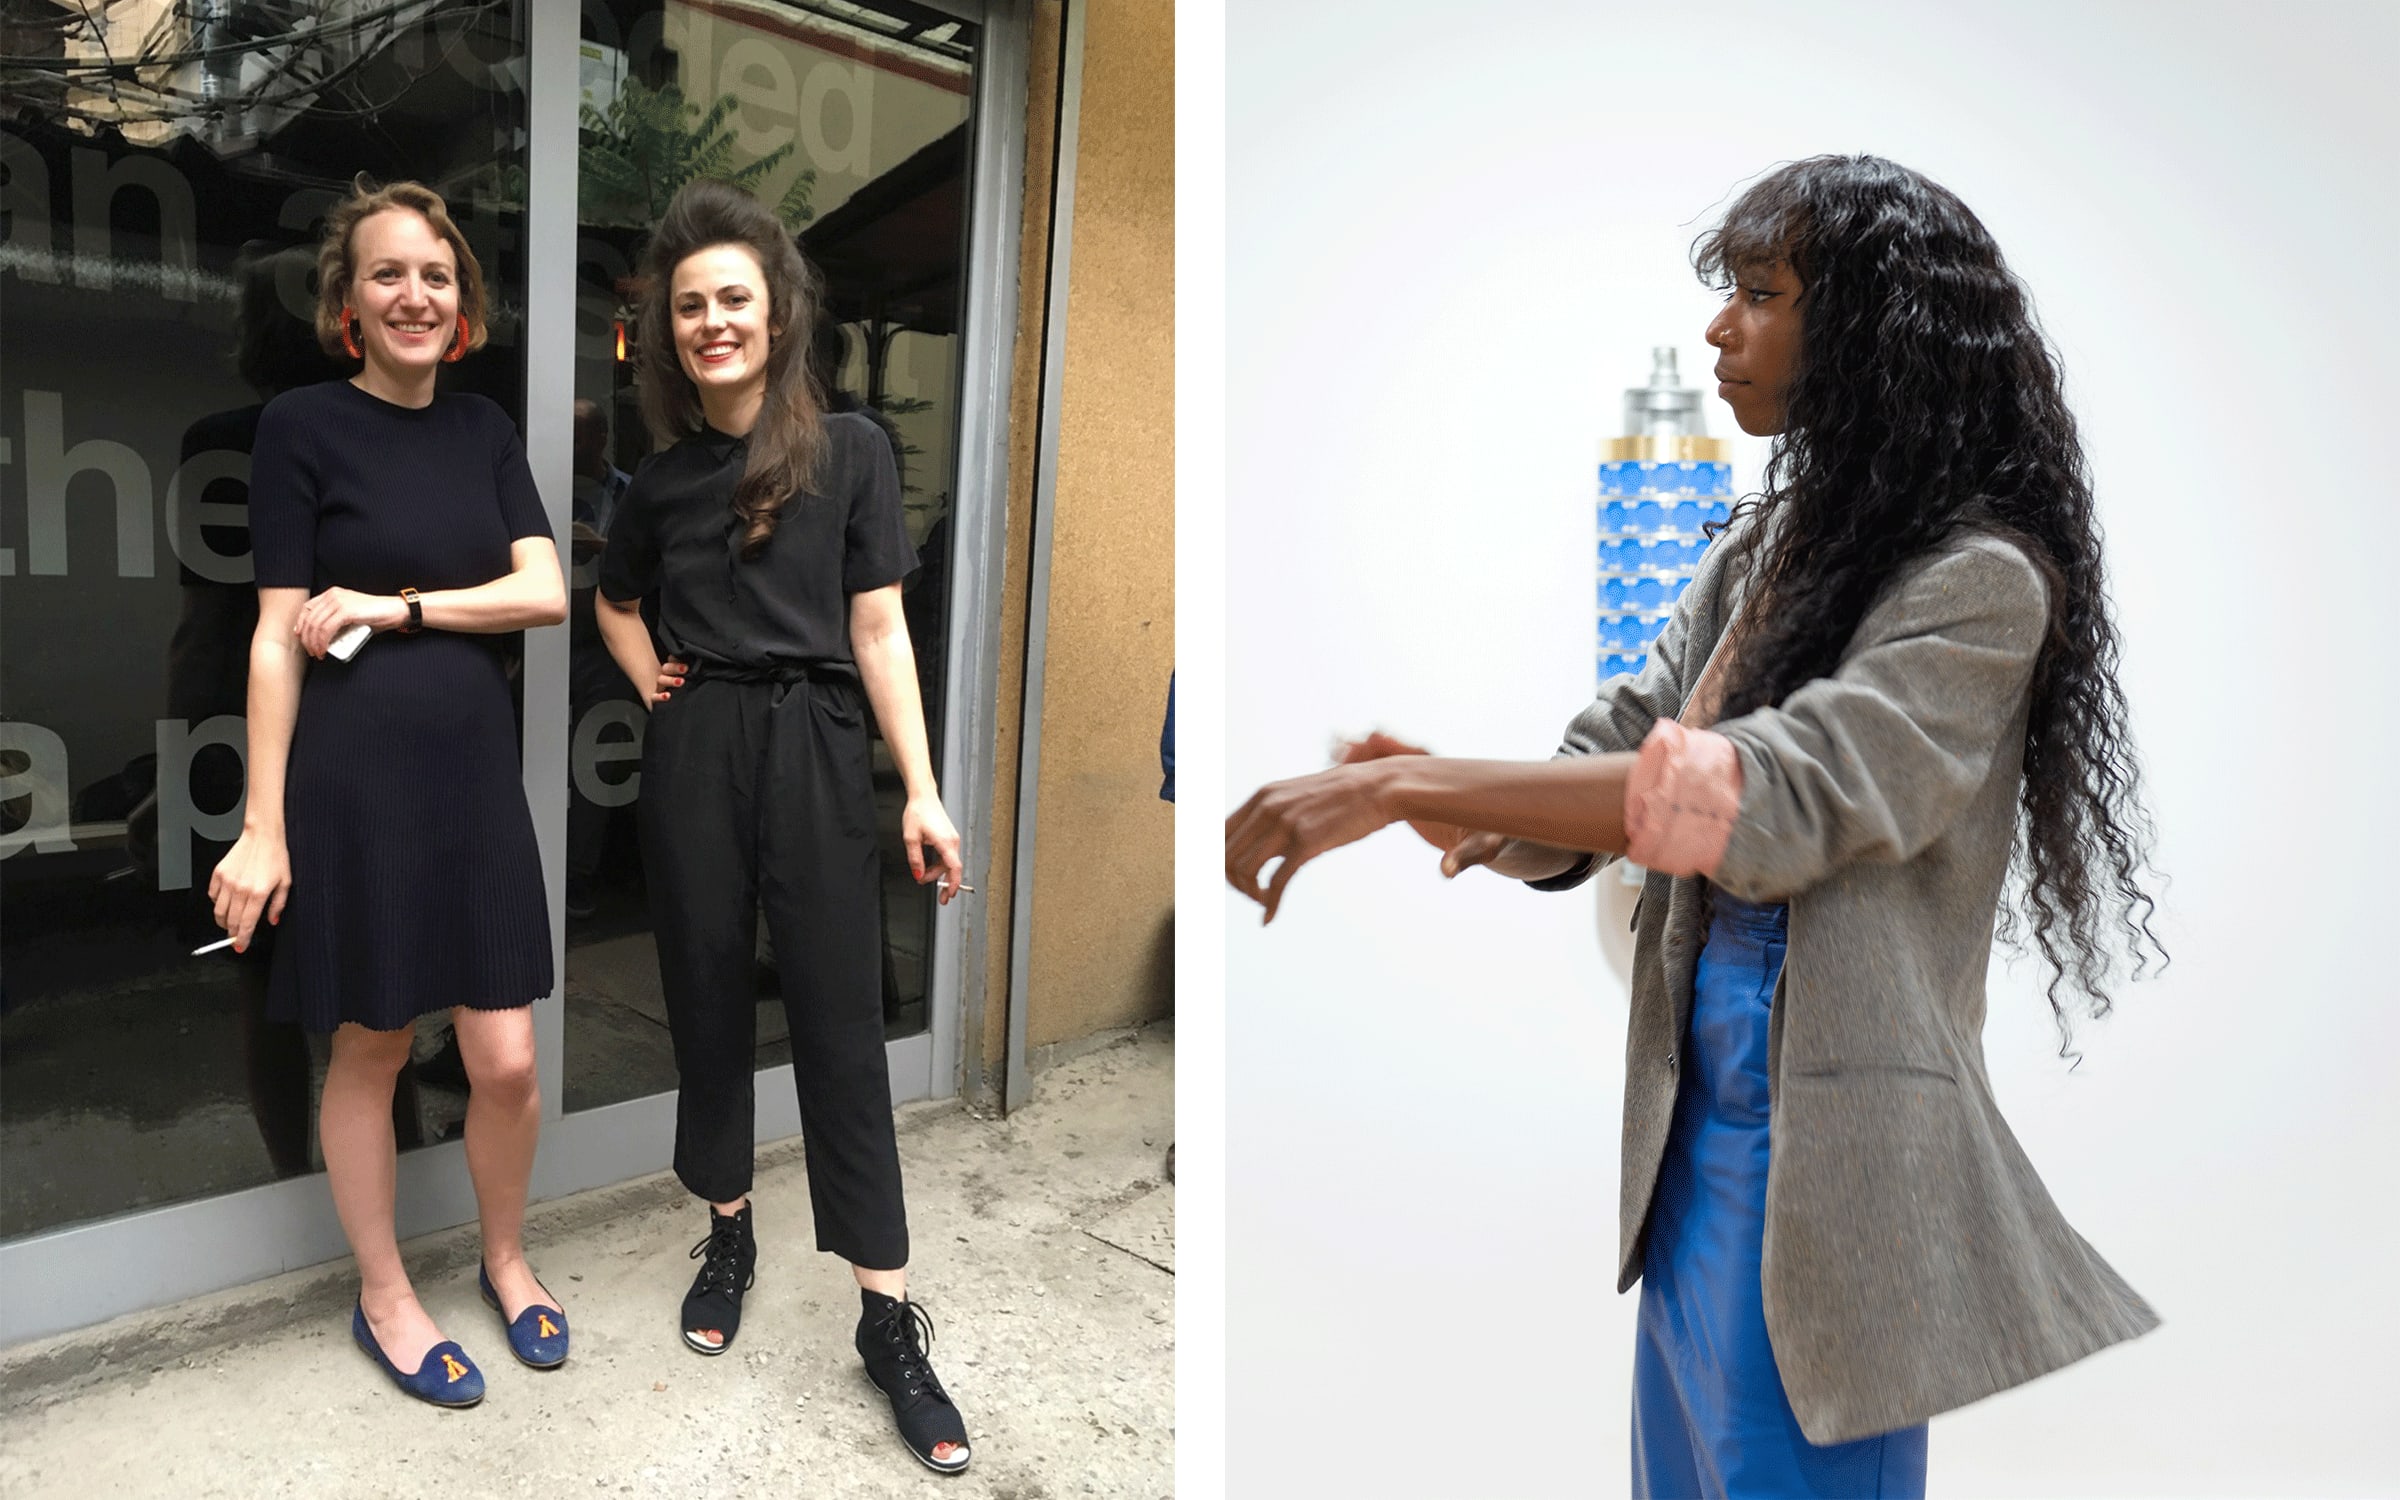 Left: Isabella Ritter and Katharina Schendl. Photograph by Tina Herzl. Right: Kendra Jayne Patrick in Bern, 2023. Photograph by Ernst Fischer.